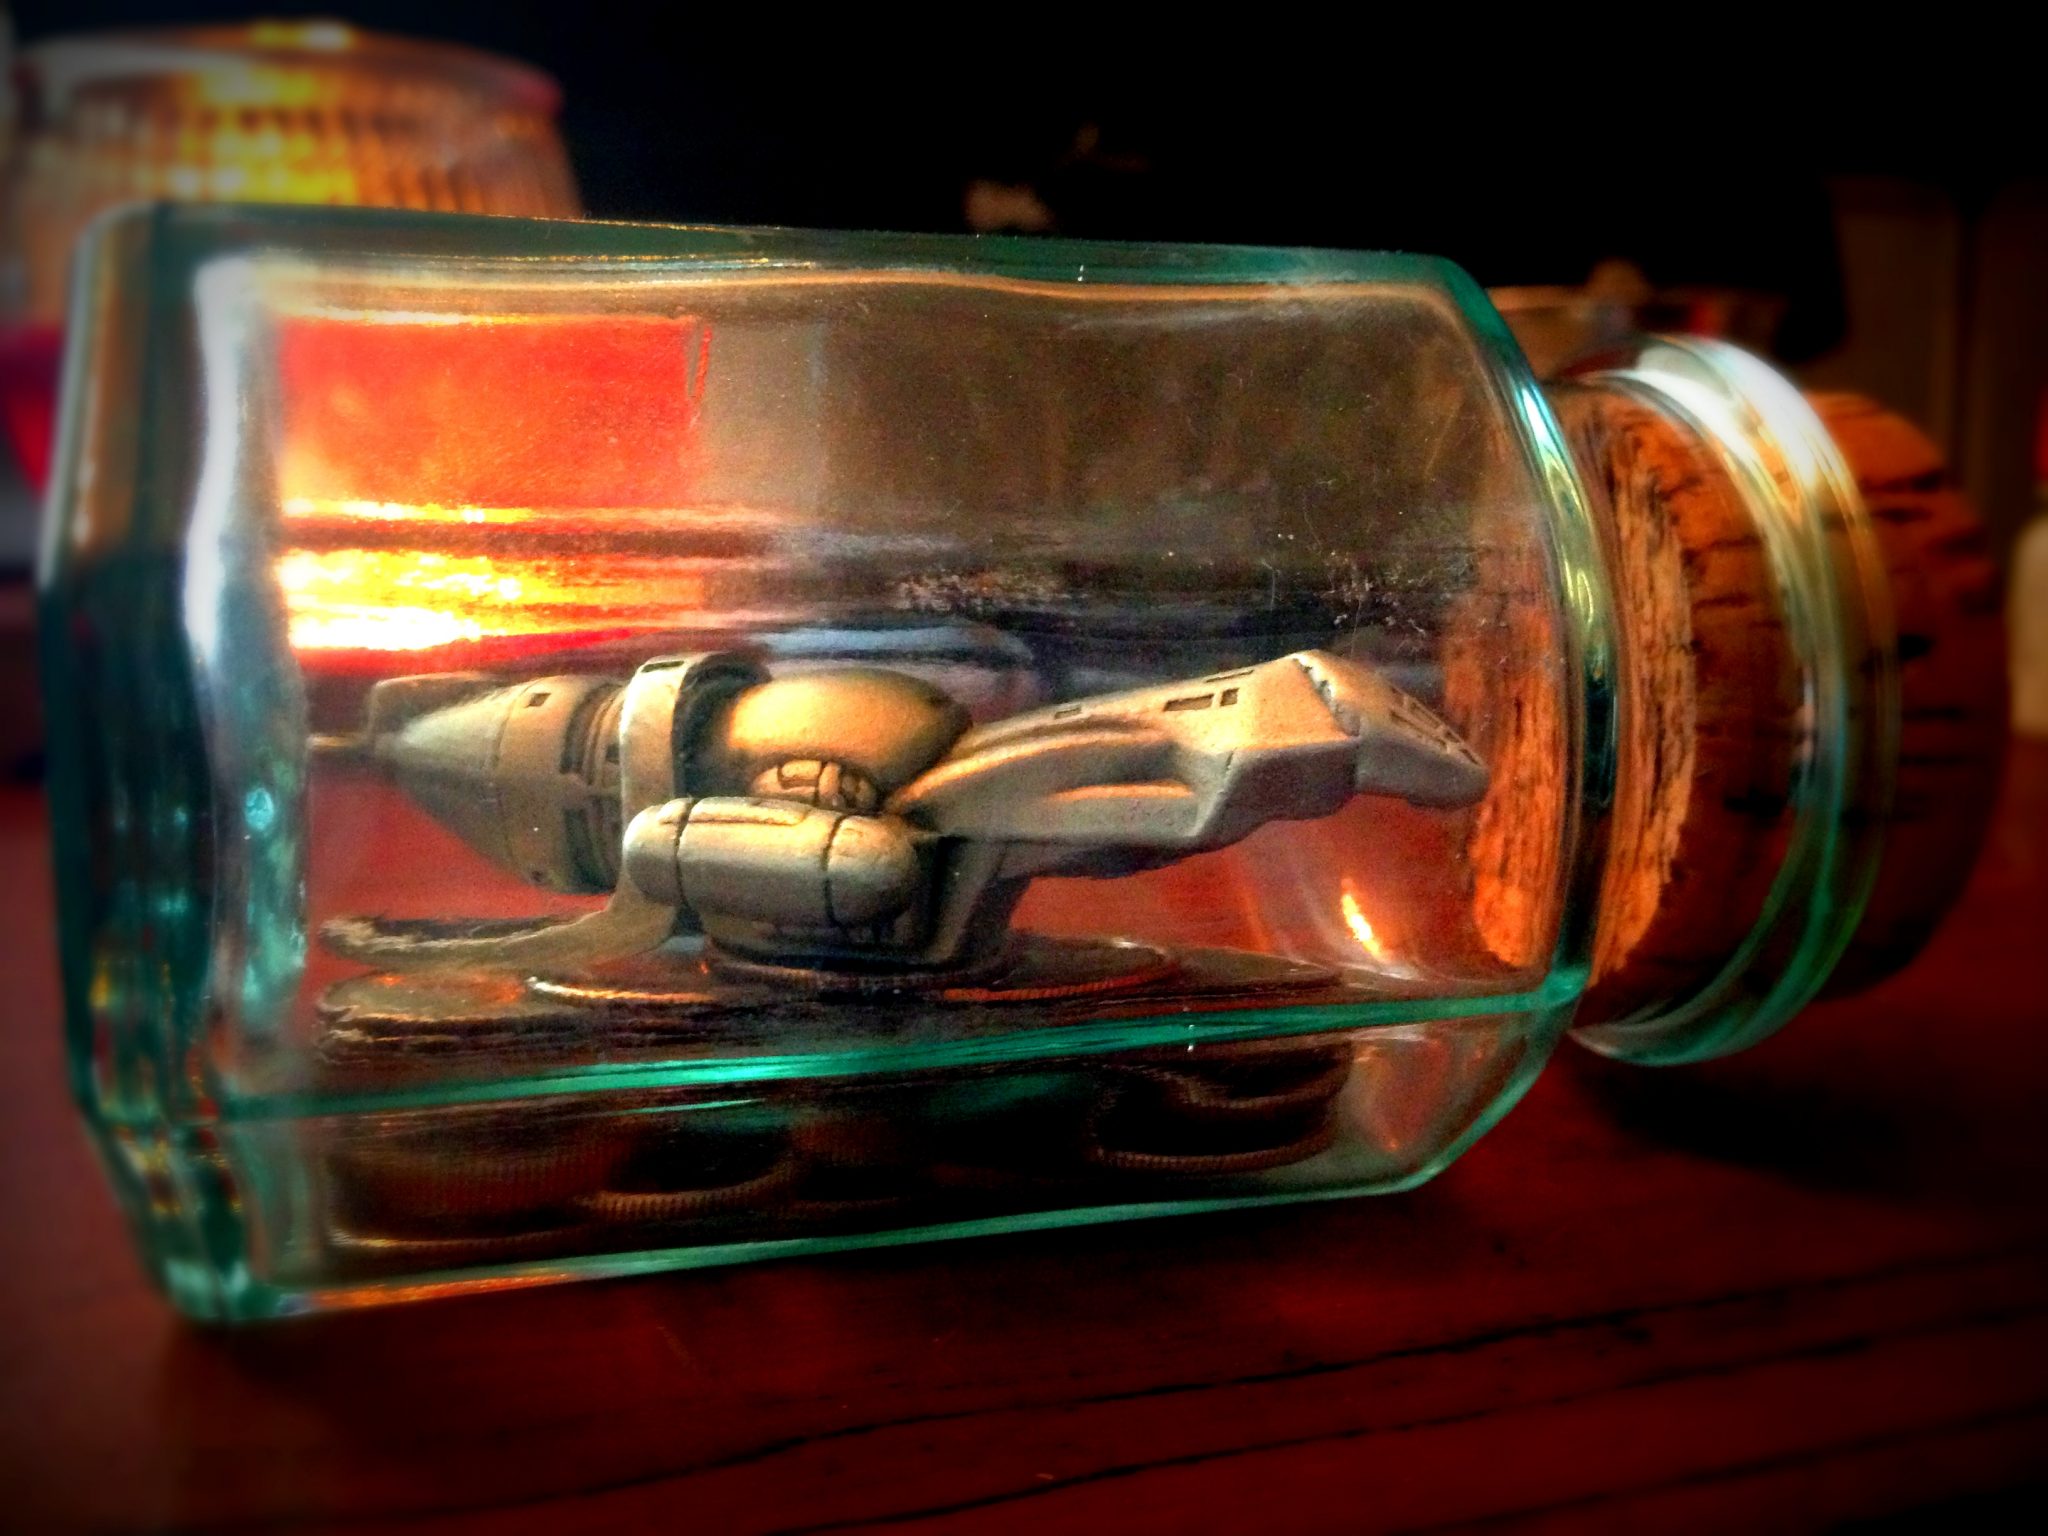 I caught a Firefly in a jar, which also happens to be a ship in a bottle.